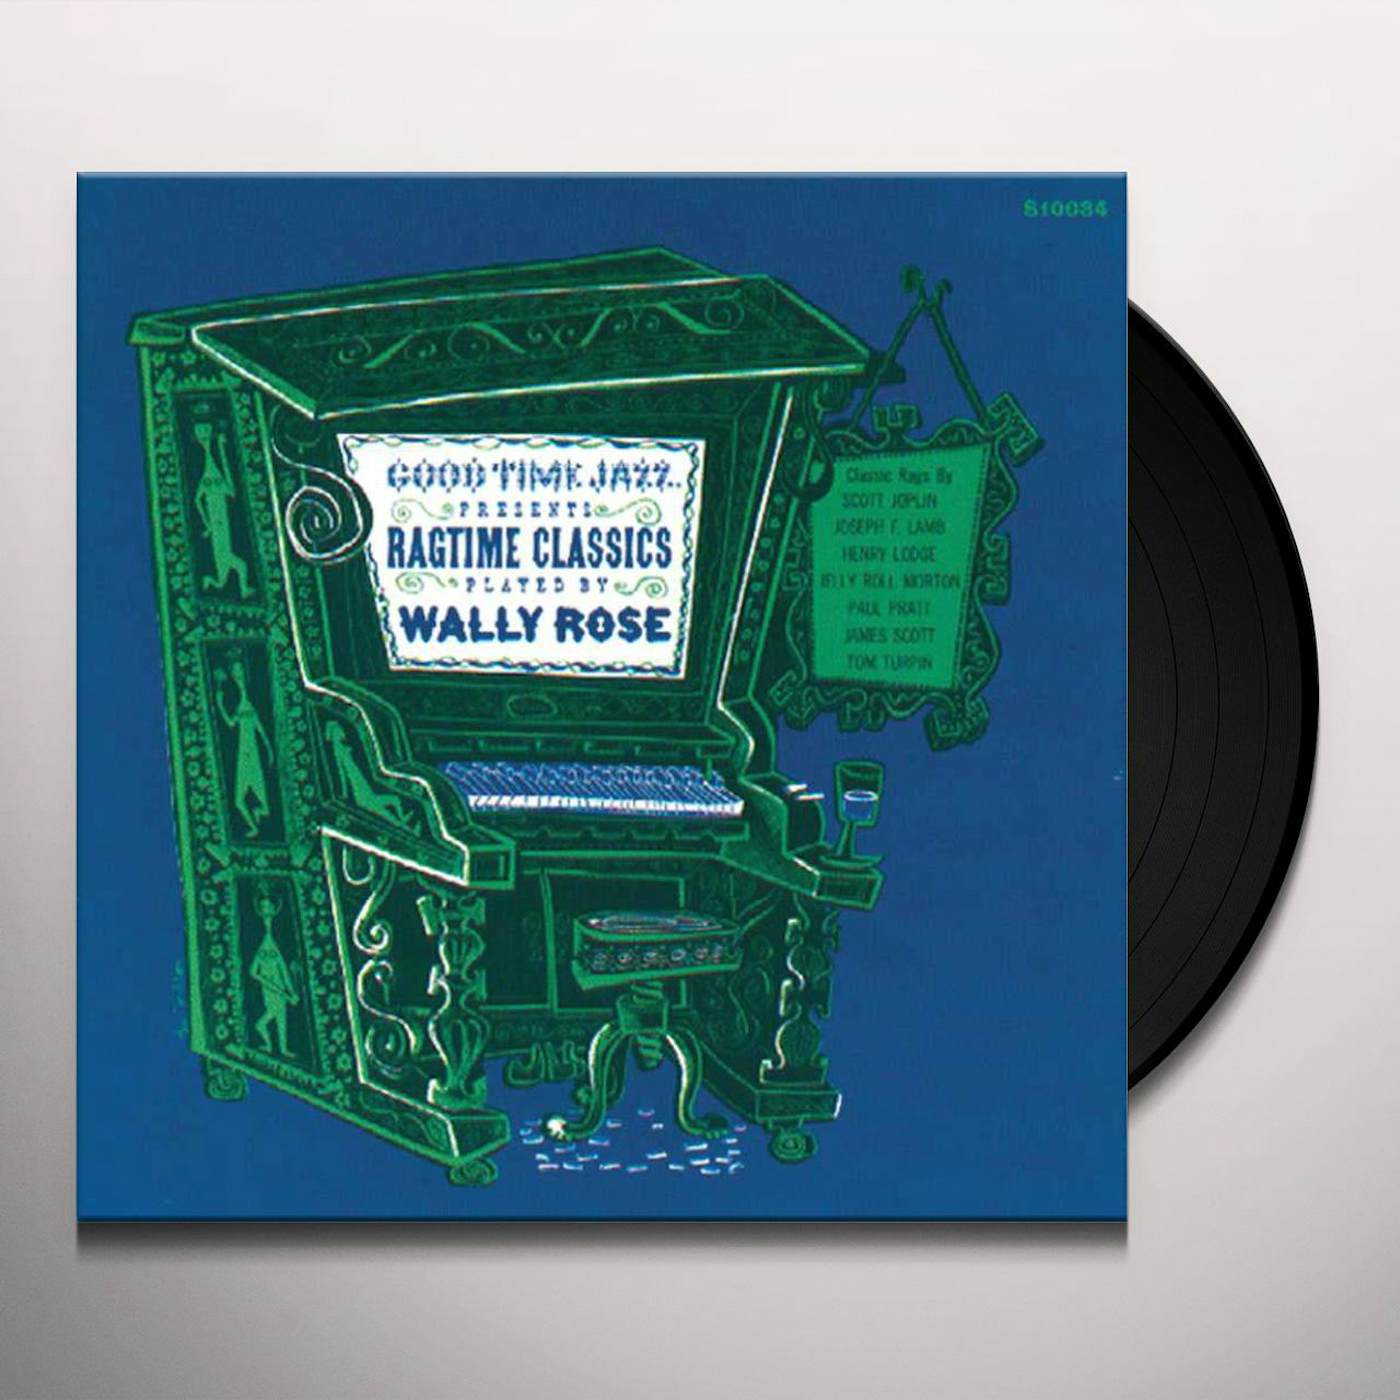 RAGTIME CLASSICS PLAYED BY WALLY ROSE Vinyl Record